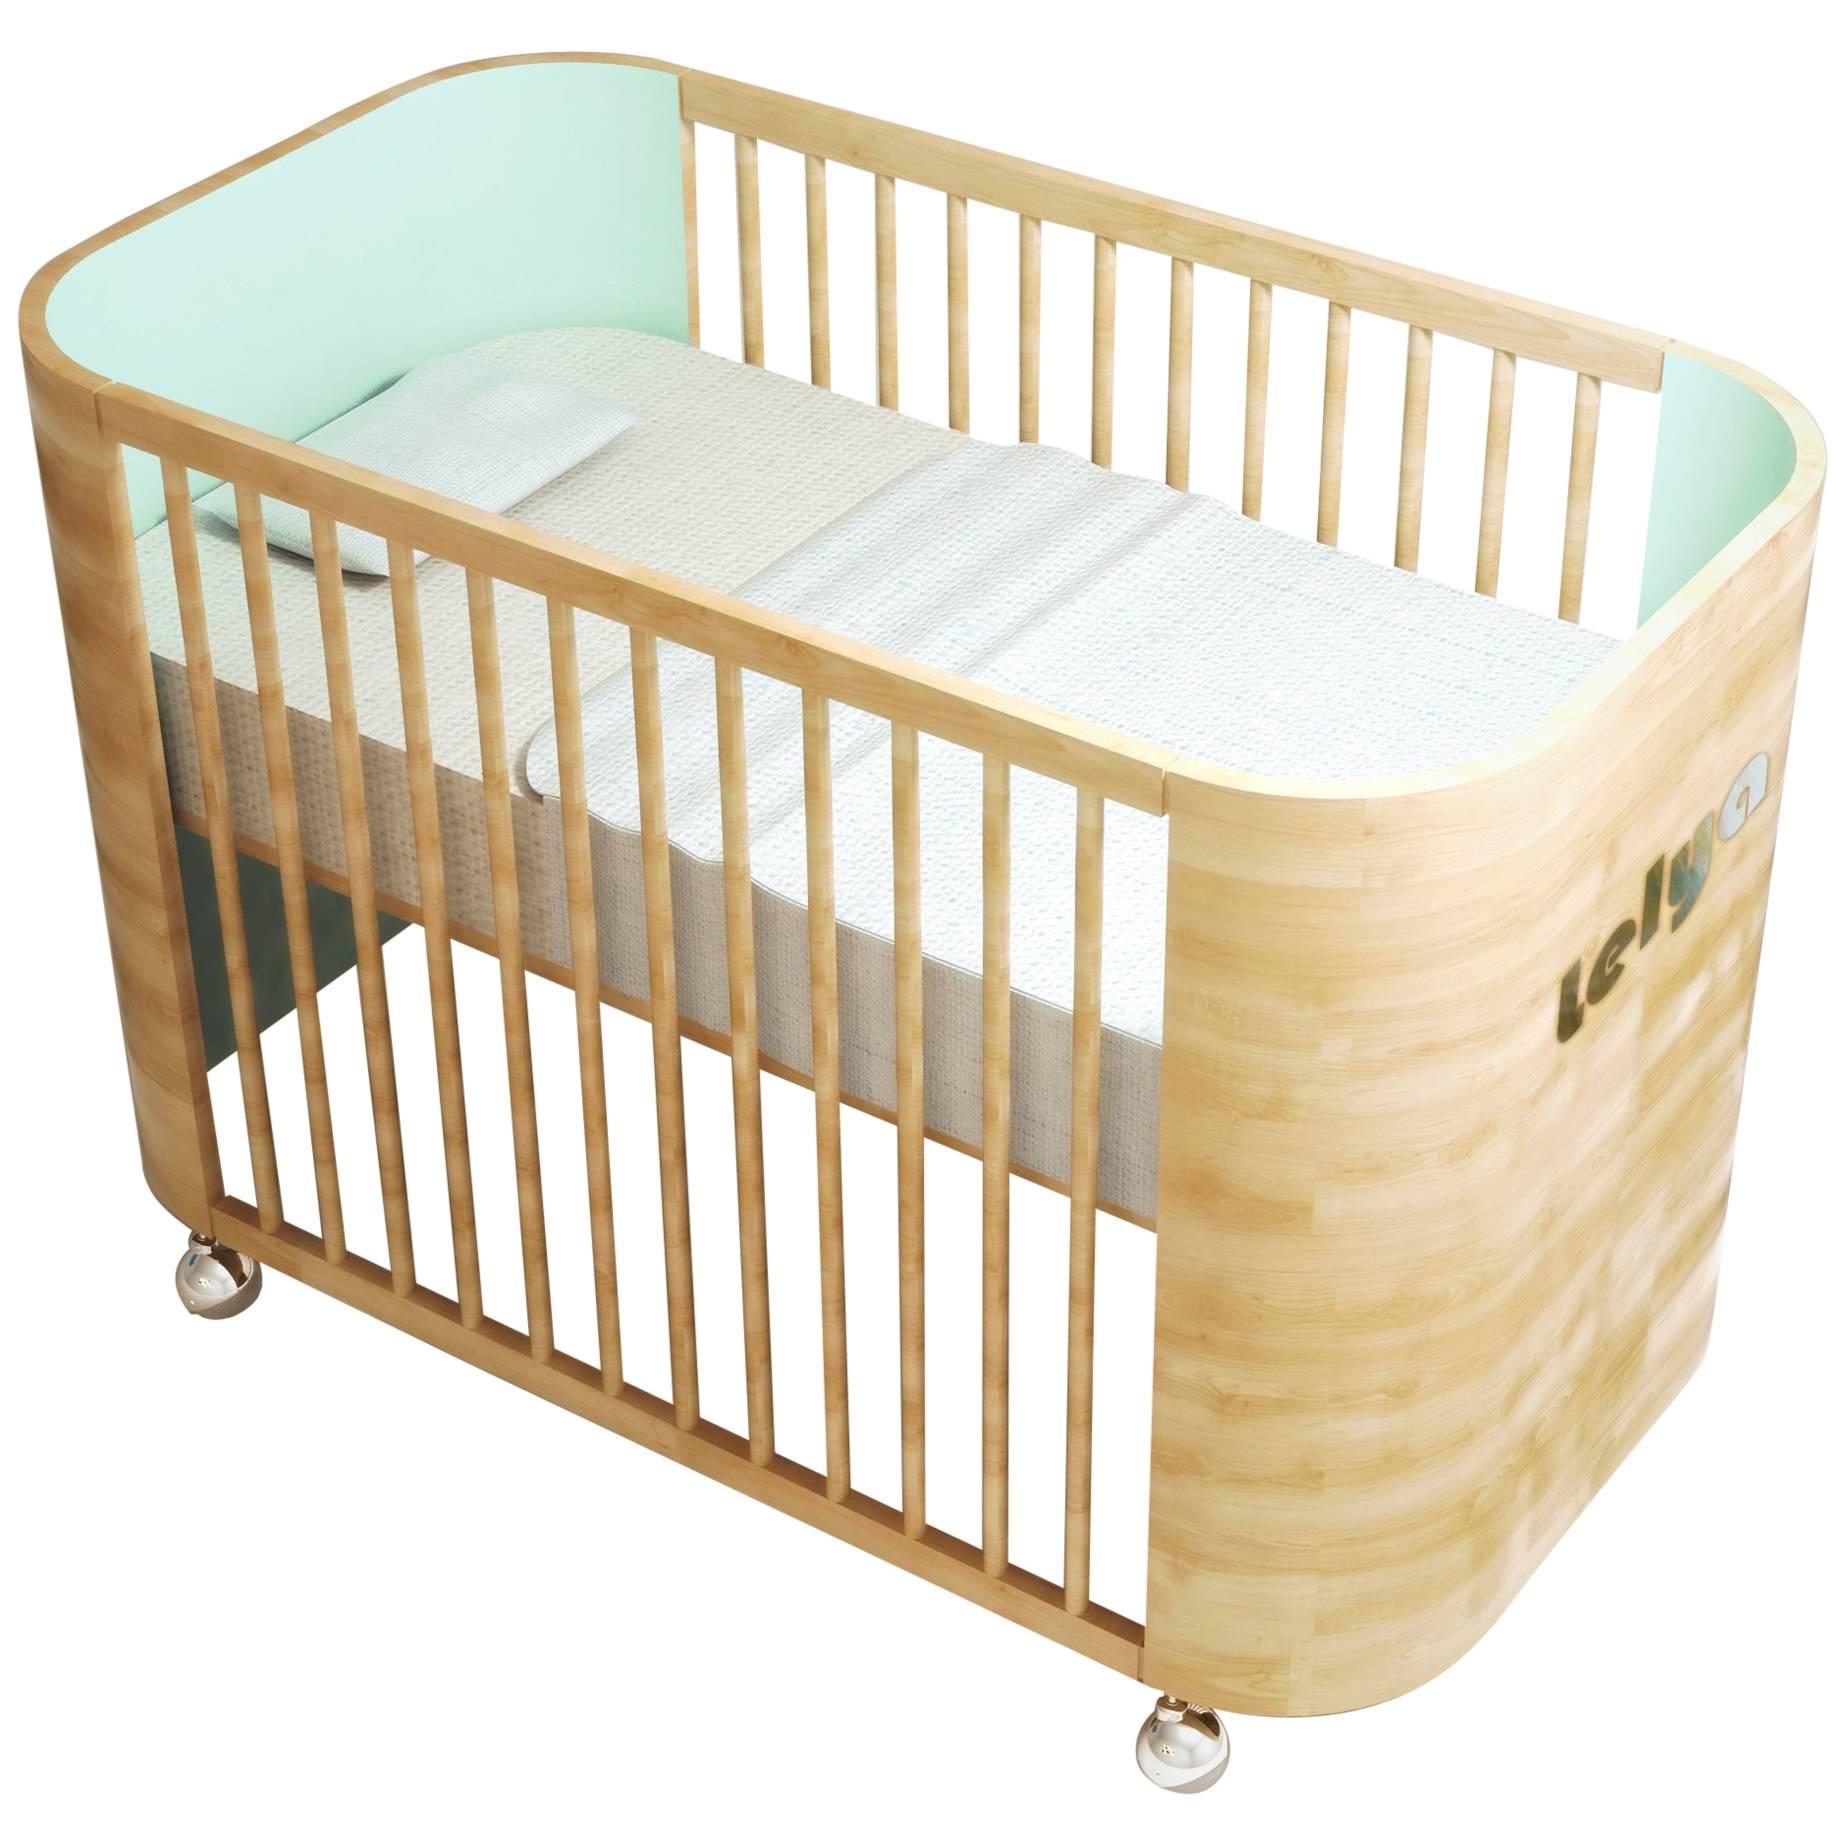 Personalized Embrace Love Crib in Beech Wood and Light Green by Misk Nursery For Sale